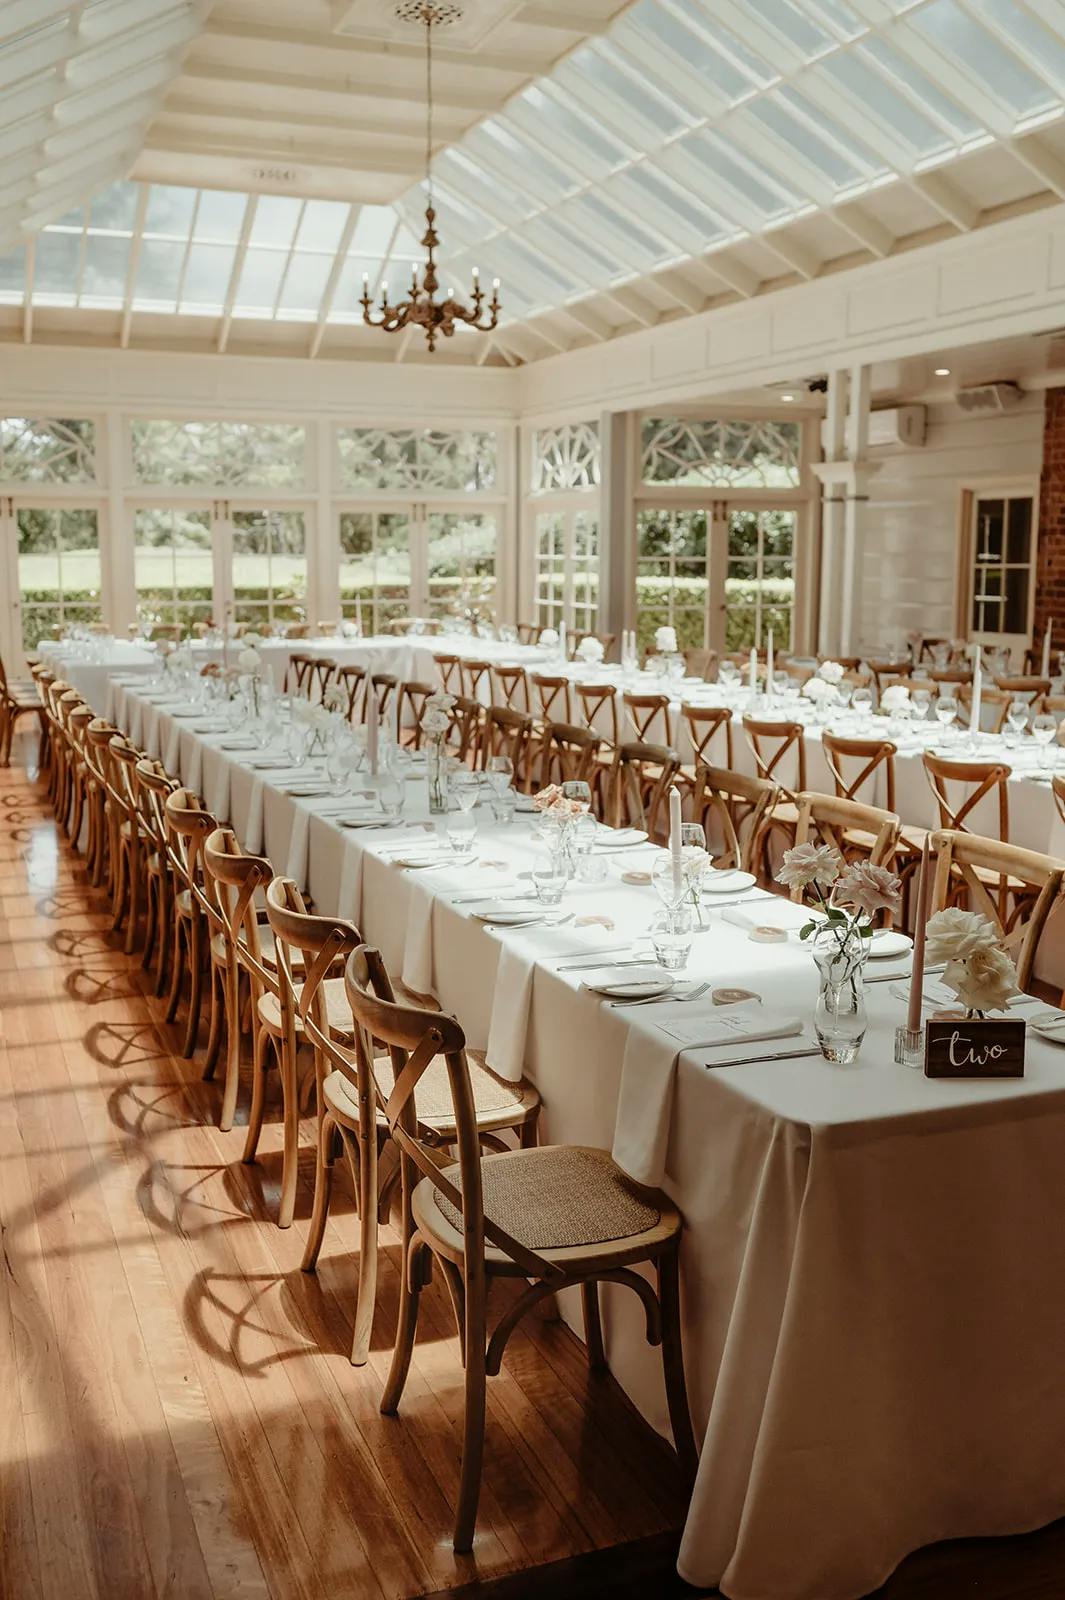 A sunlit elegant banquet hall with long, white-clothed tables set for a formal event. Wooden chairs line the tables, each adorned with plates, glasses, and simple floral centerpieces. The room features large windows and a high, glass-paneled ceiling.